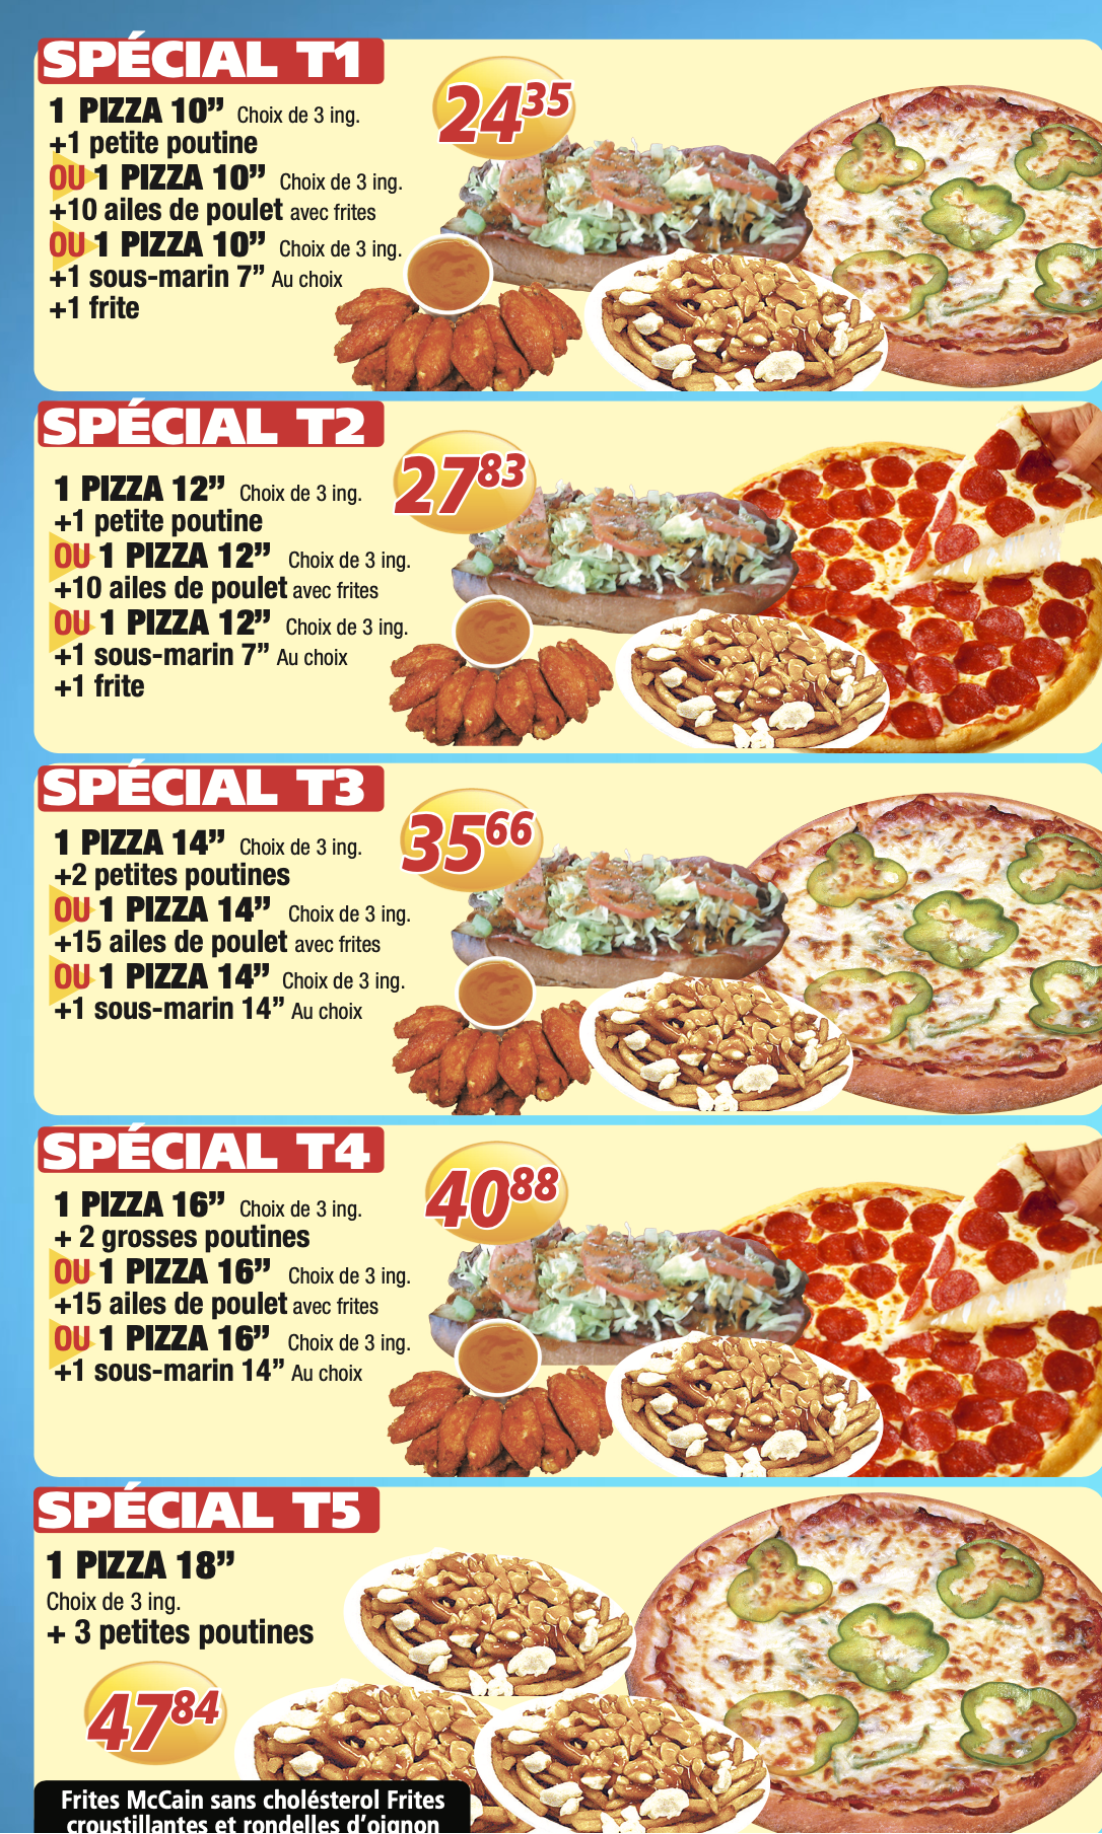 pizza-champion-ste-thErese--promo-pizza-5.png